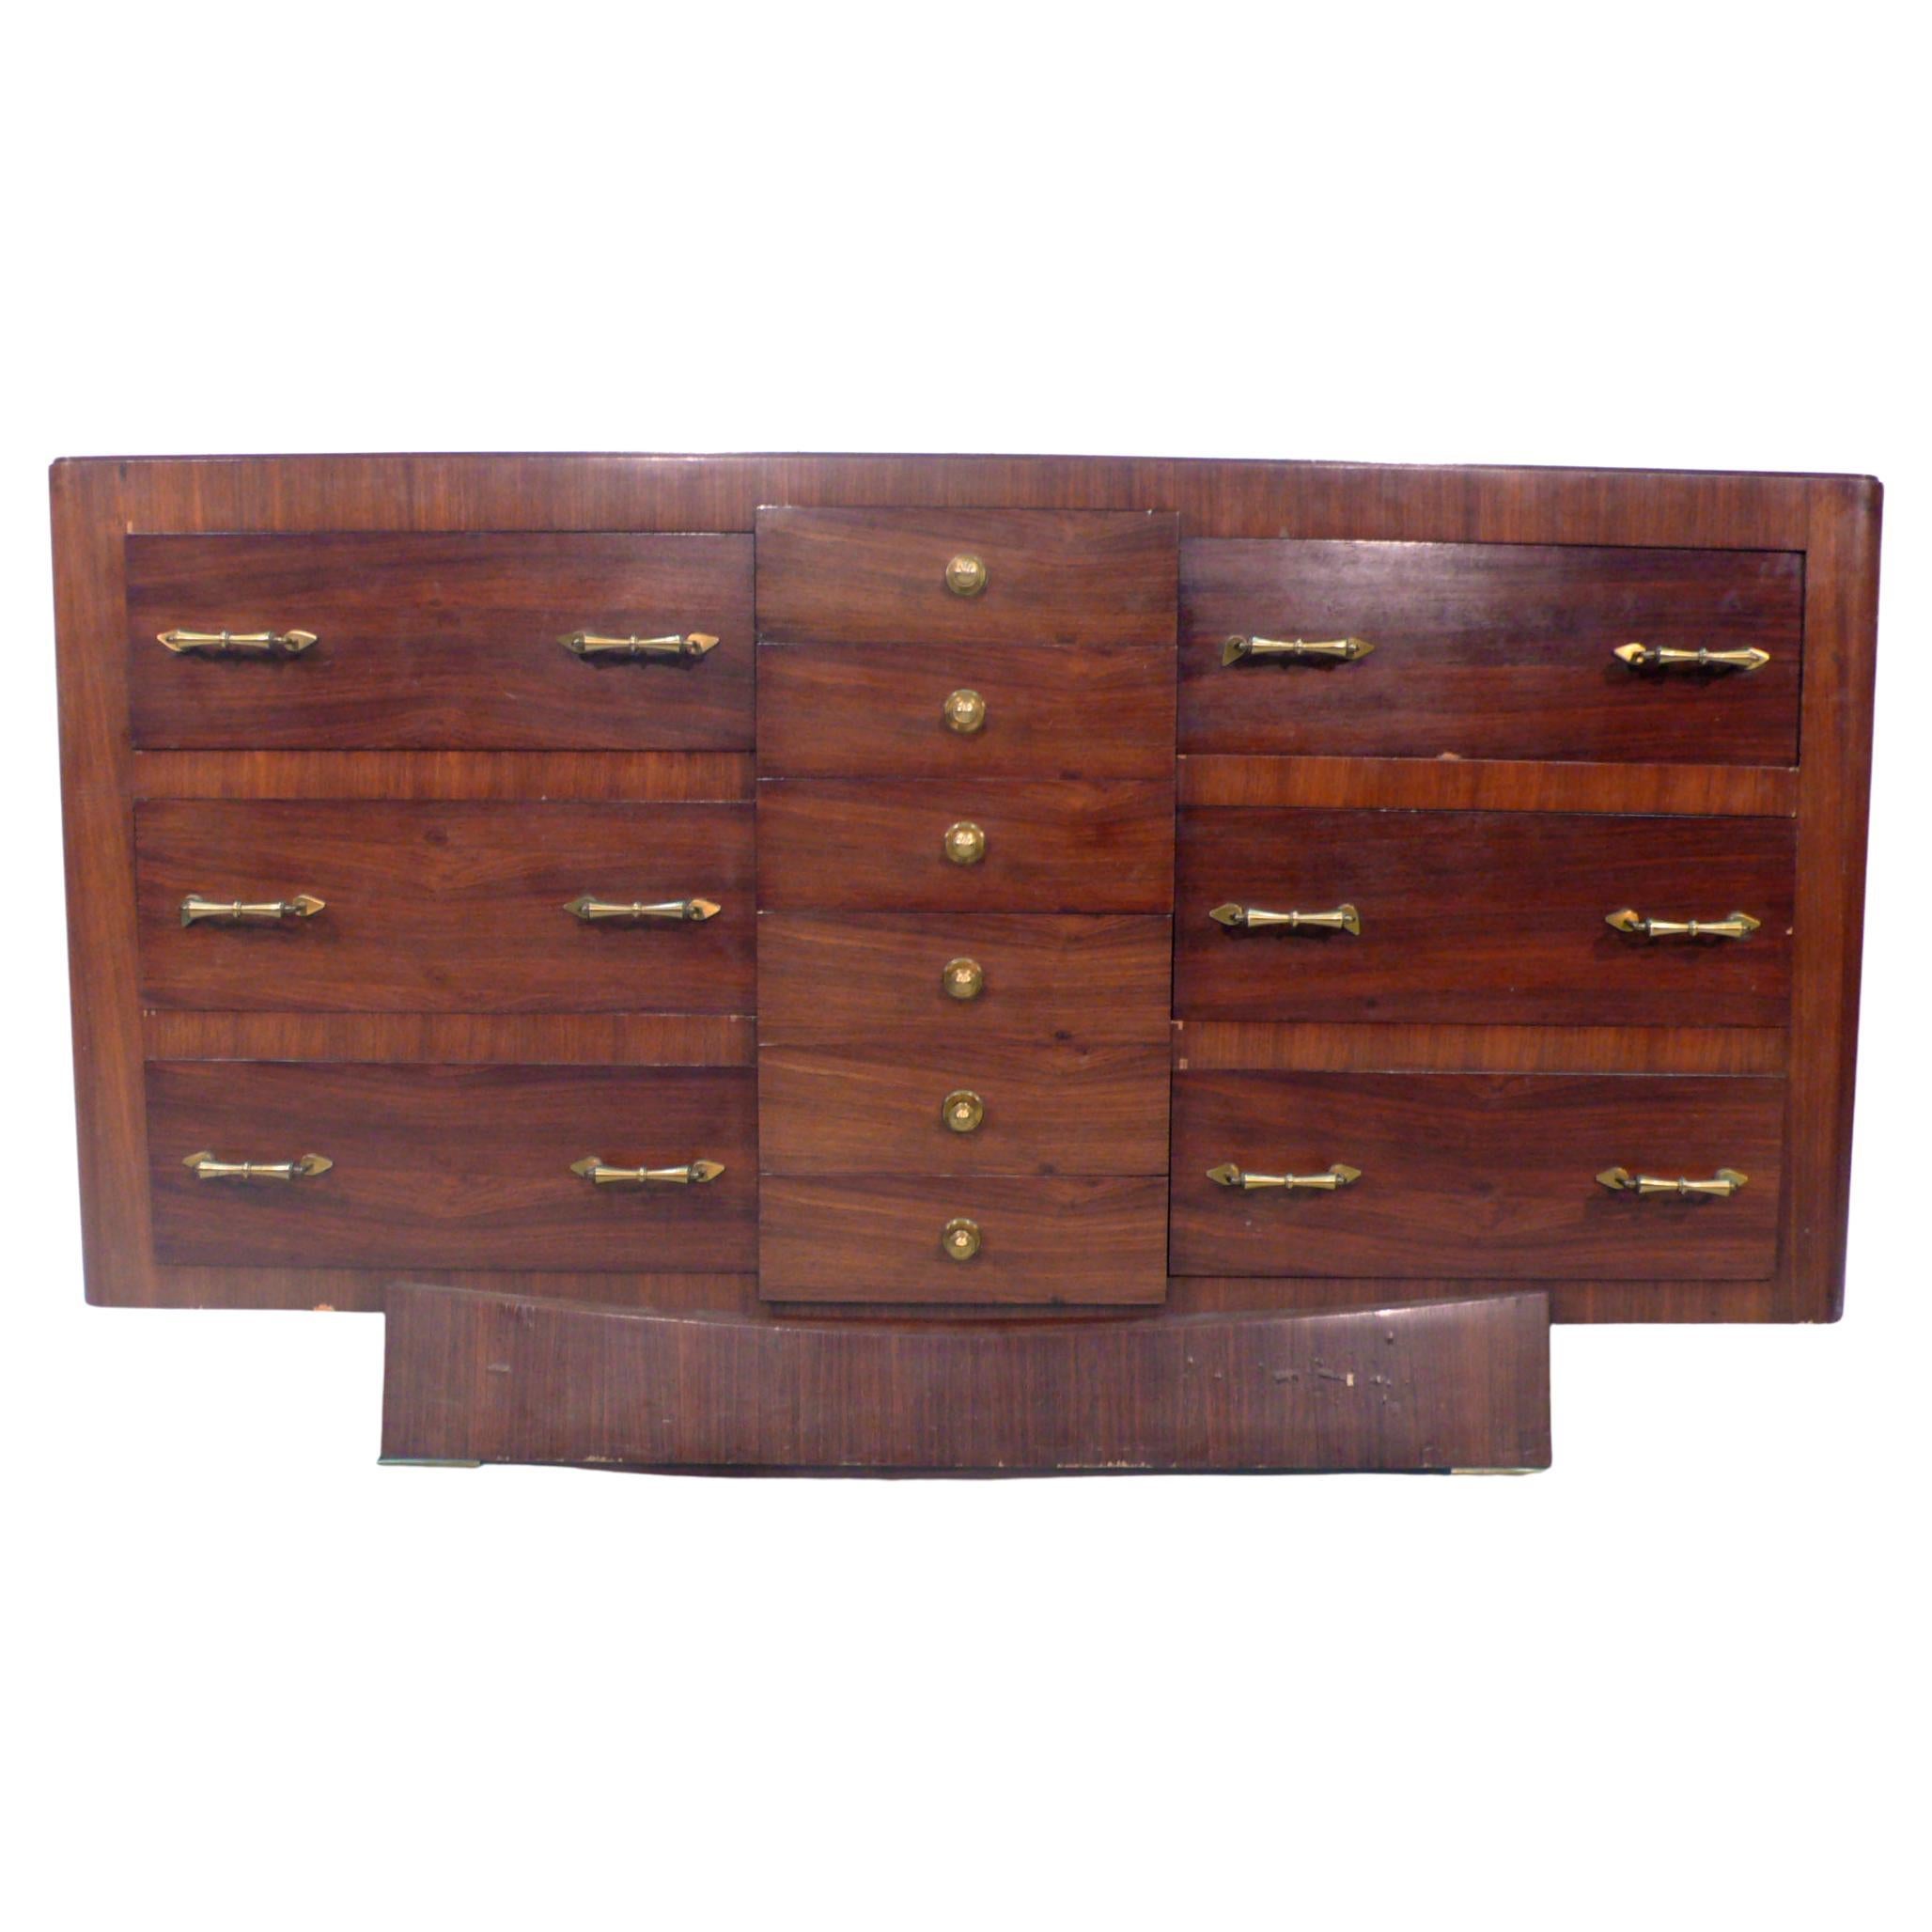 Large Art Déco Credenza / Chest of Drawers by Alfred Porteneuve For Sale